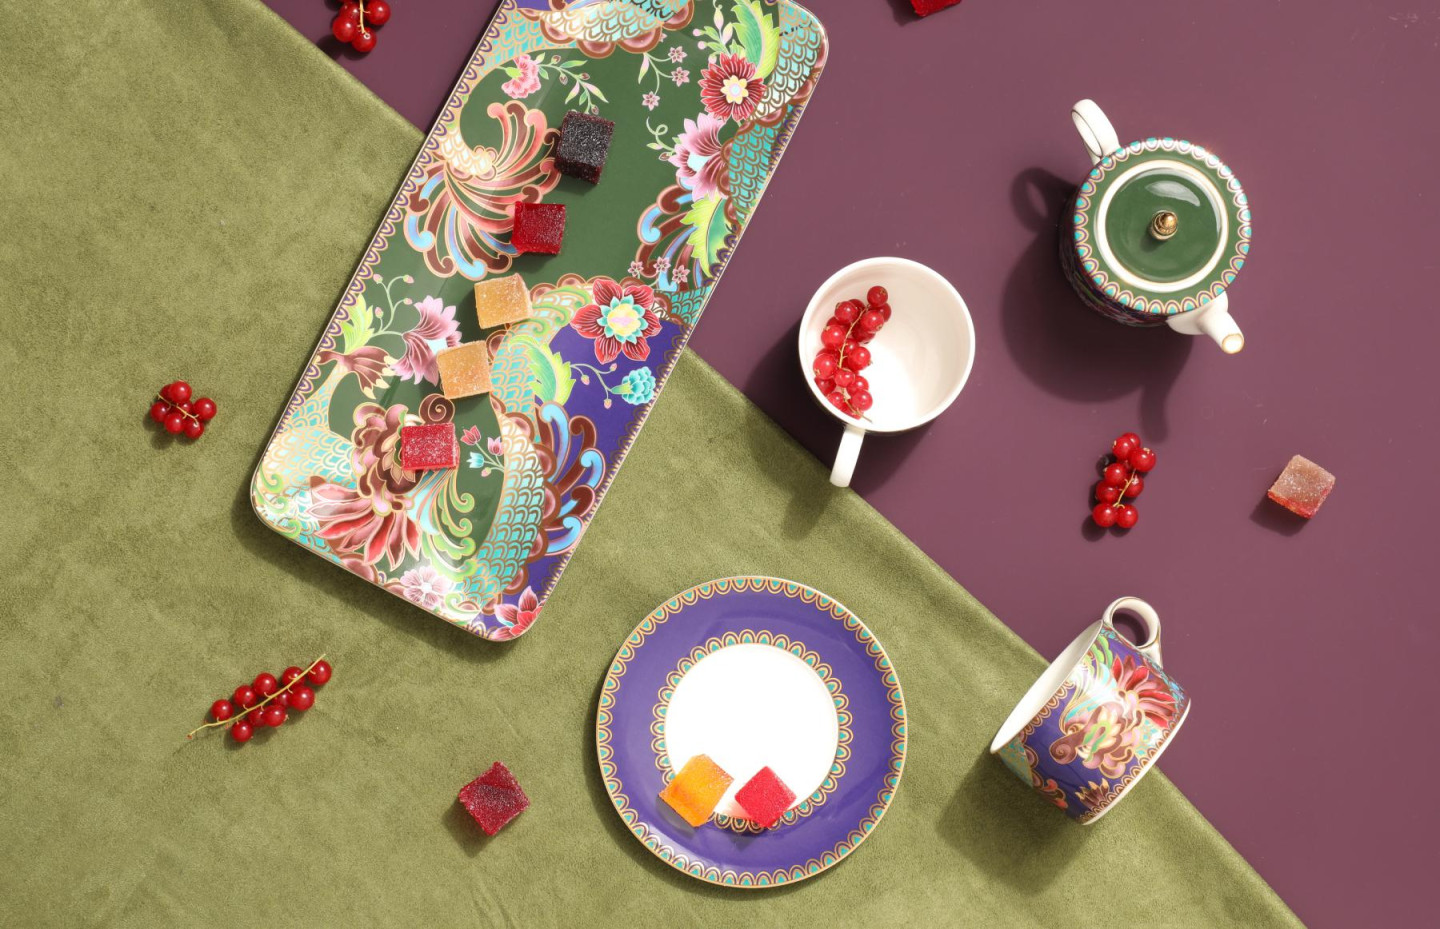 What Christmas tableware and accessories can be found at Williams Oliver